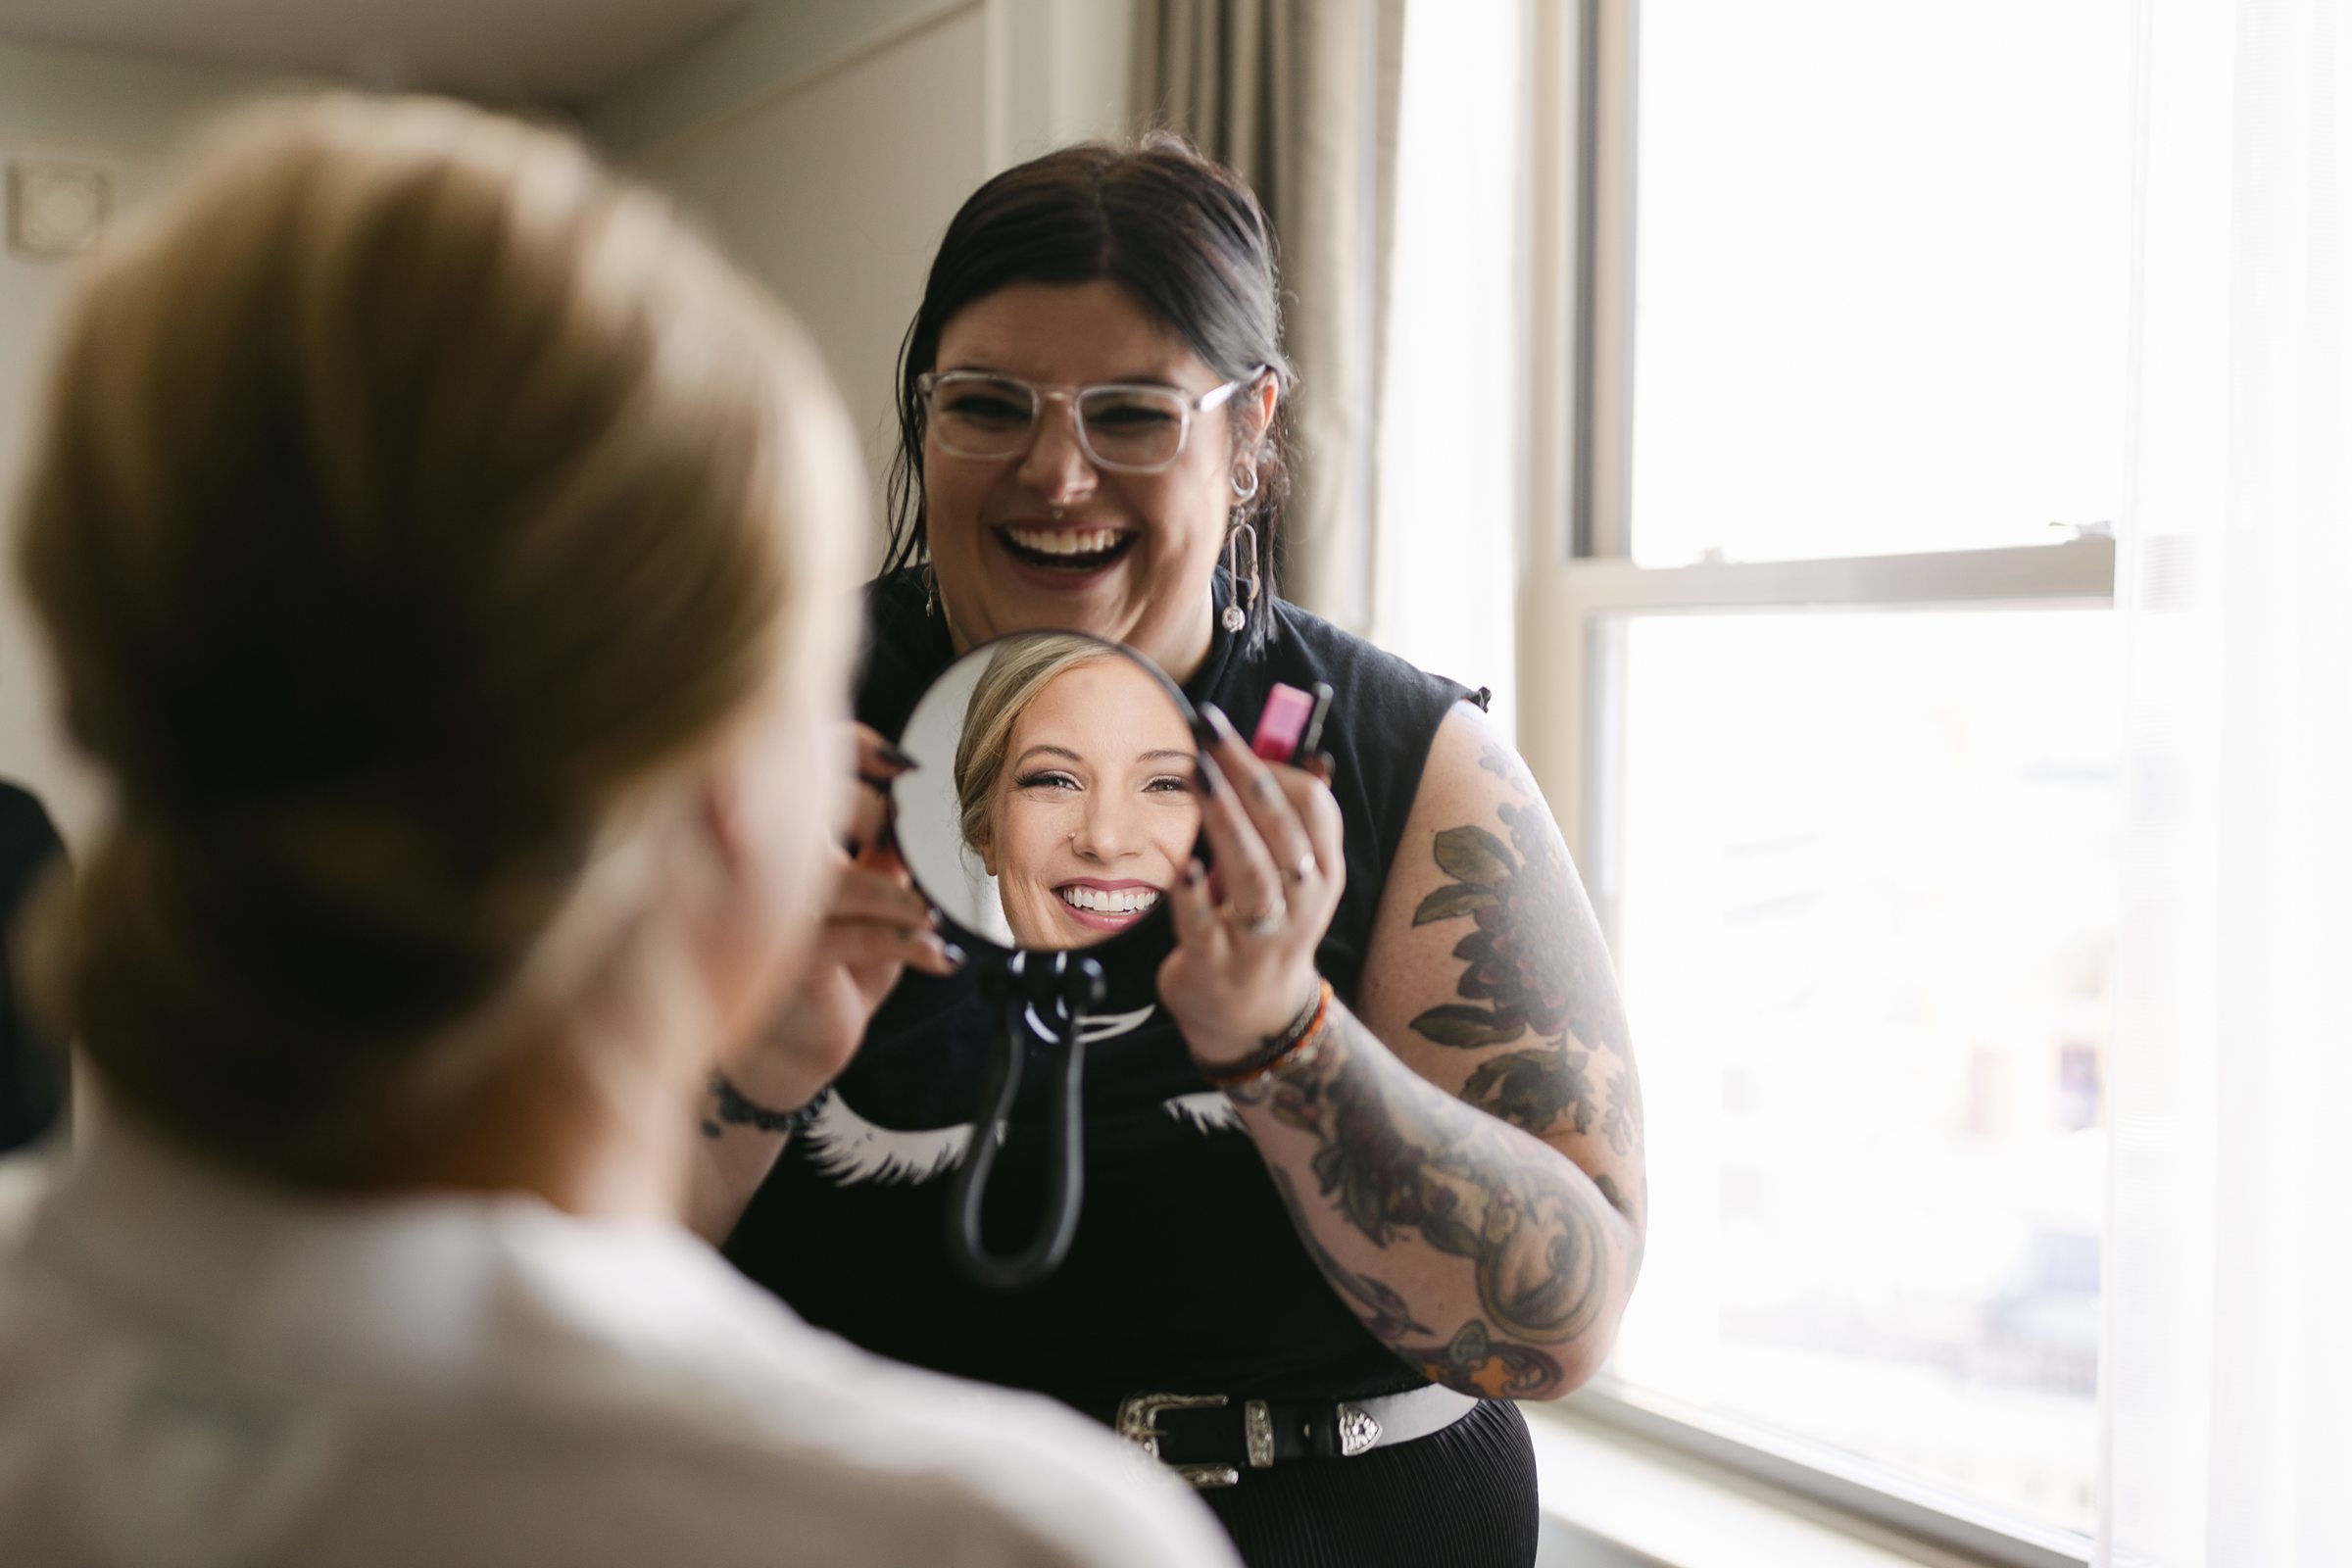 Hair and makeup artist showing bride the mirror